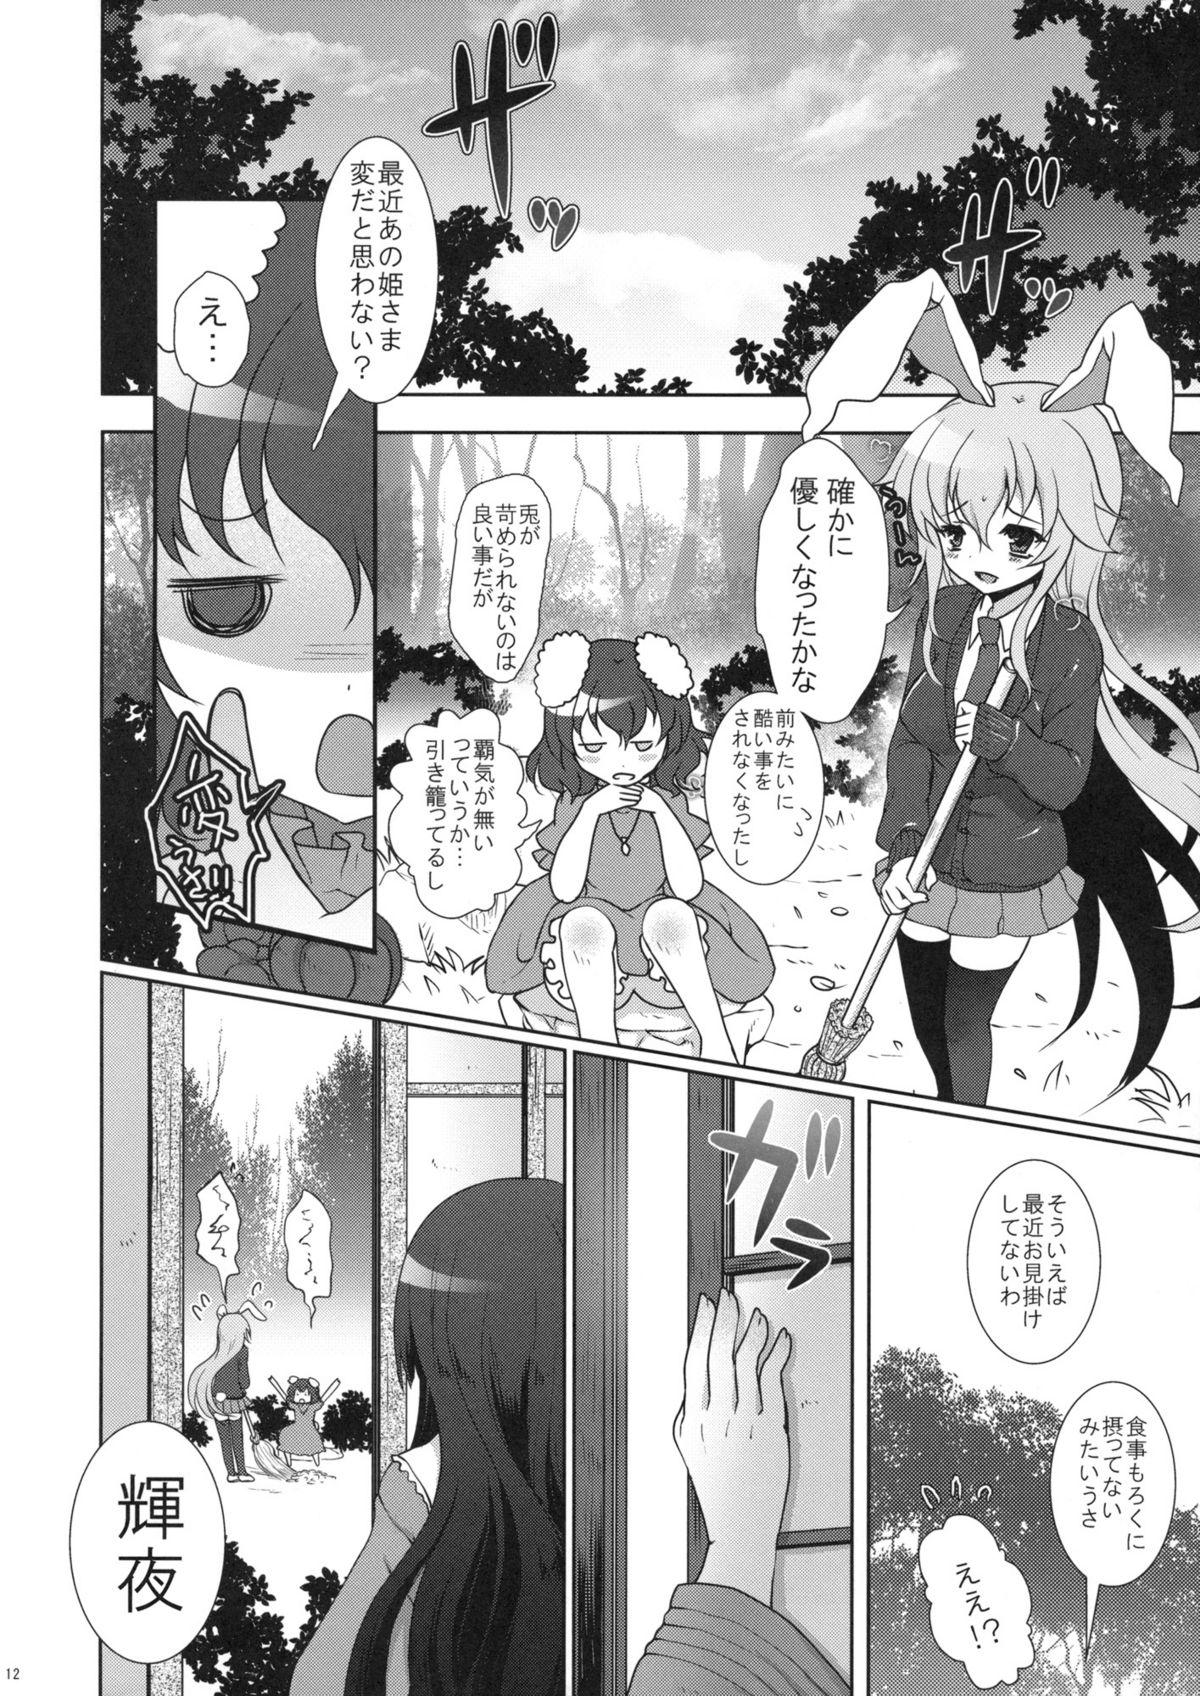 Interview Scapegoat Act:2 - Touhou project Story - Page 12